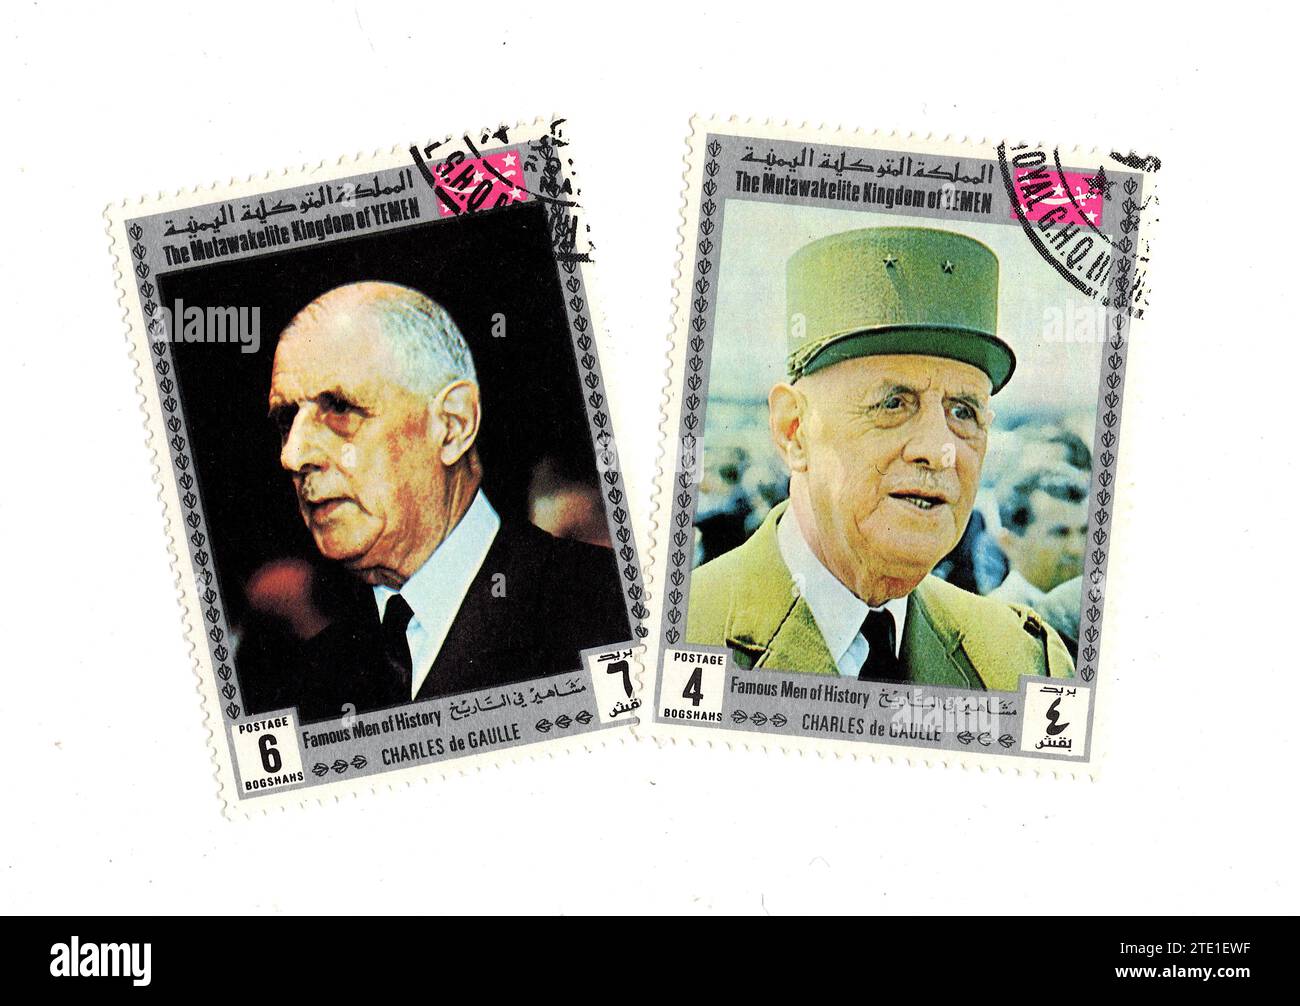 Vintage postage stamps from Yemen featuring portraits of Charles de Gaulle isolated on a white background. Stock Photo